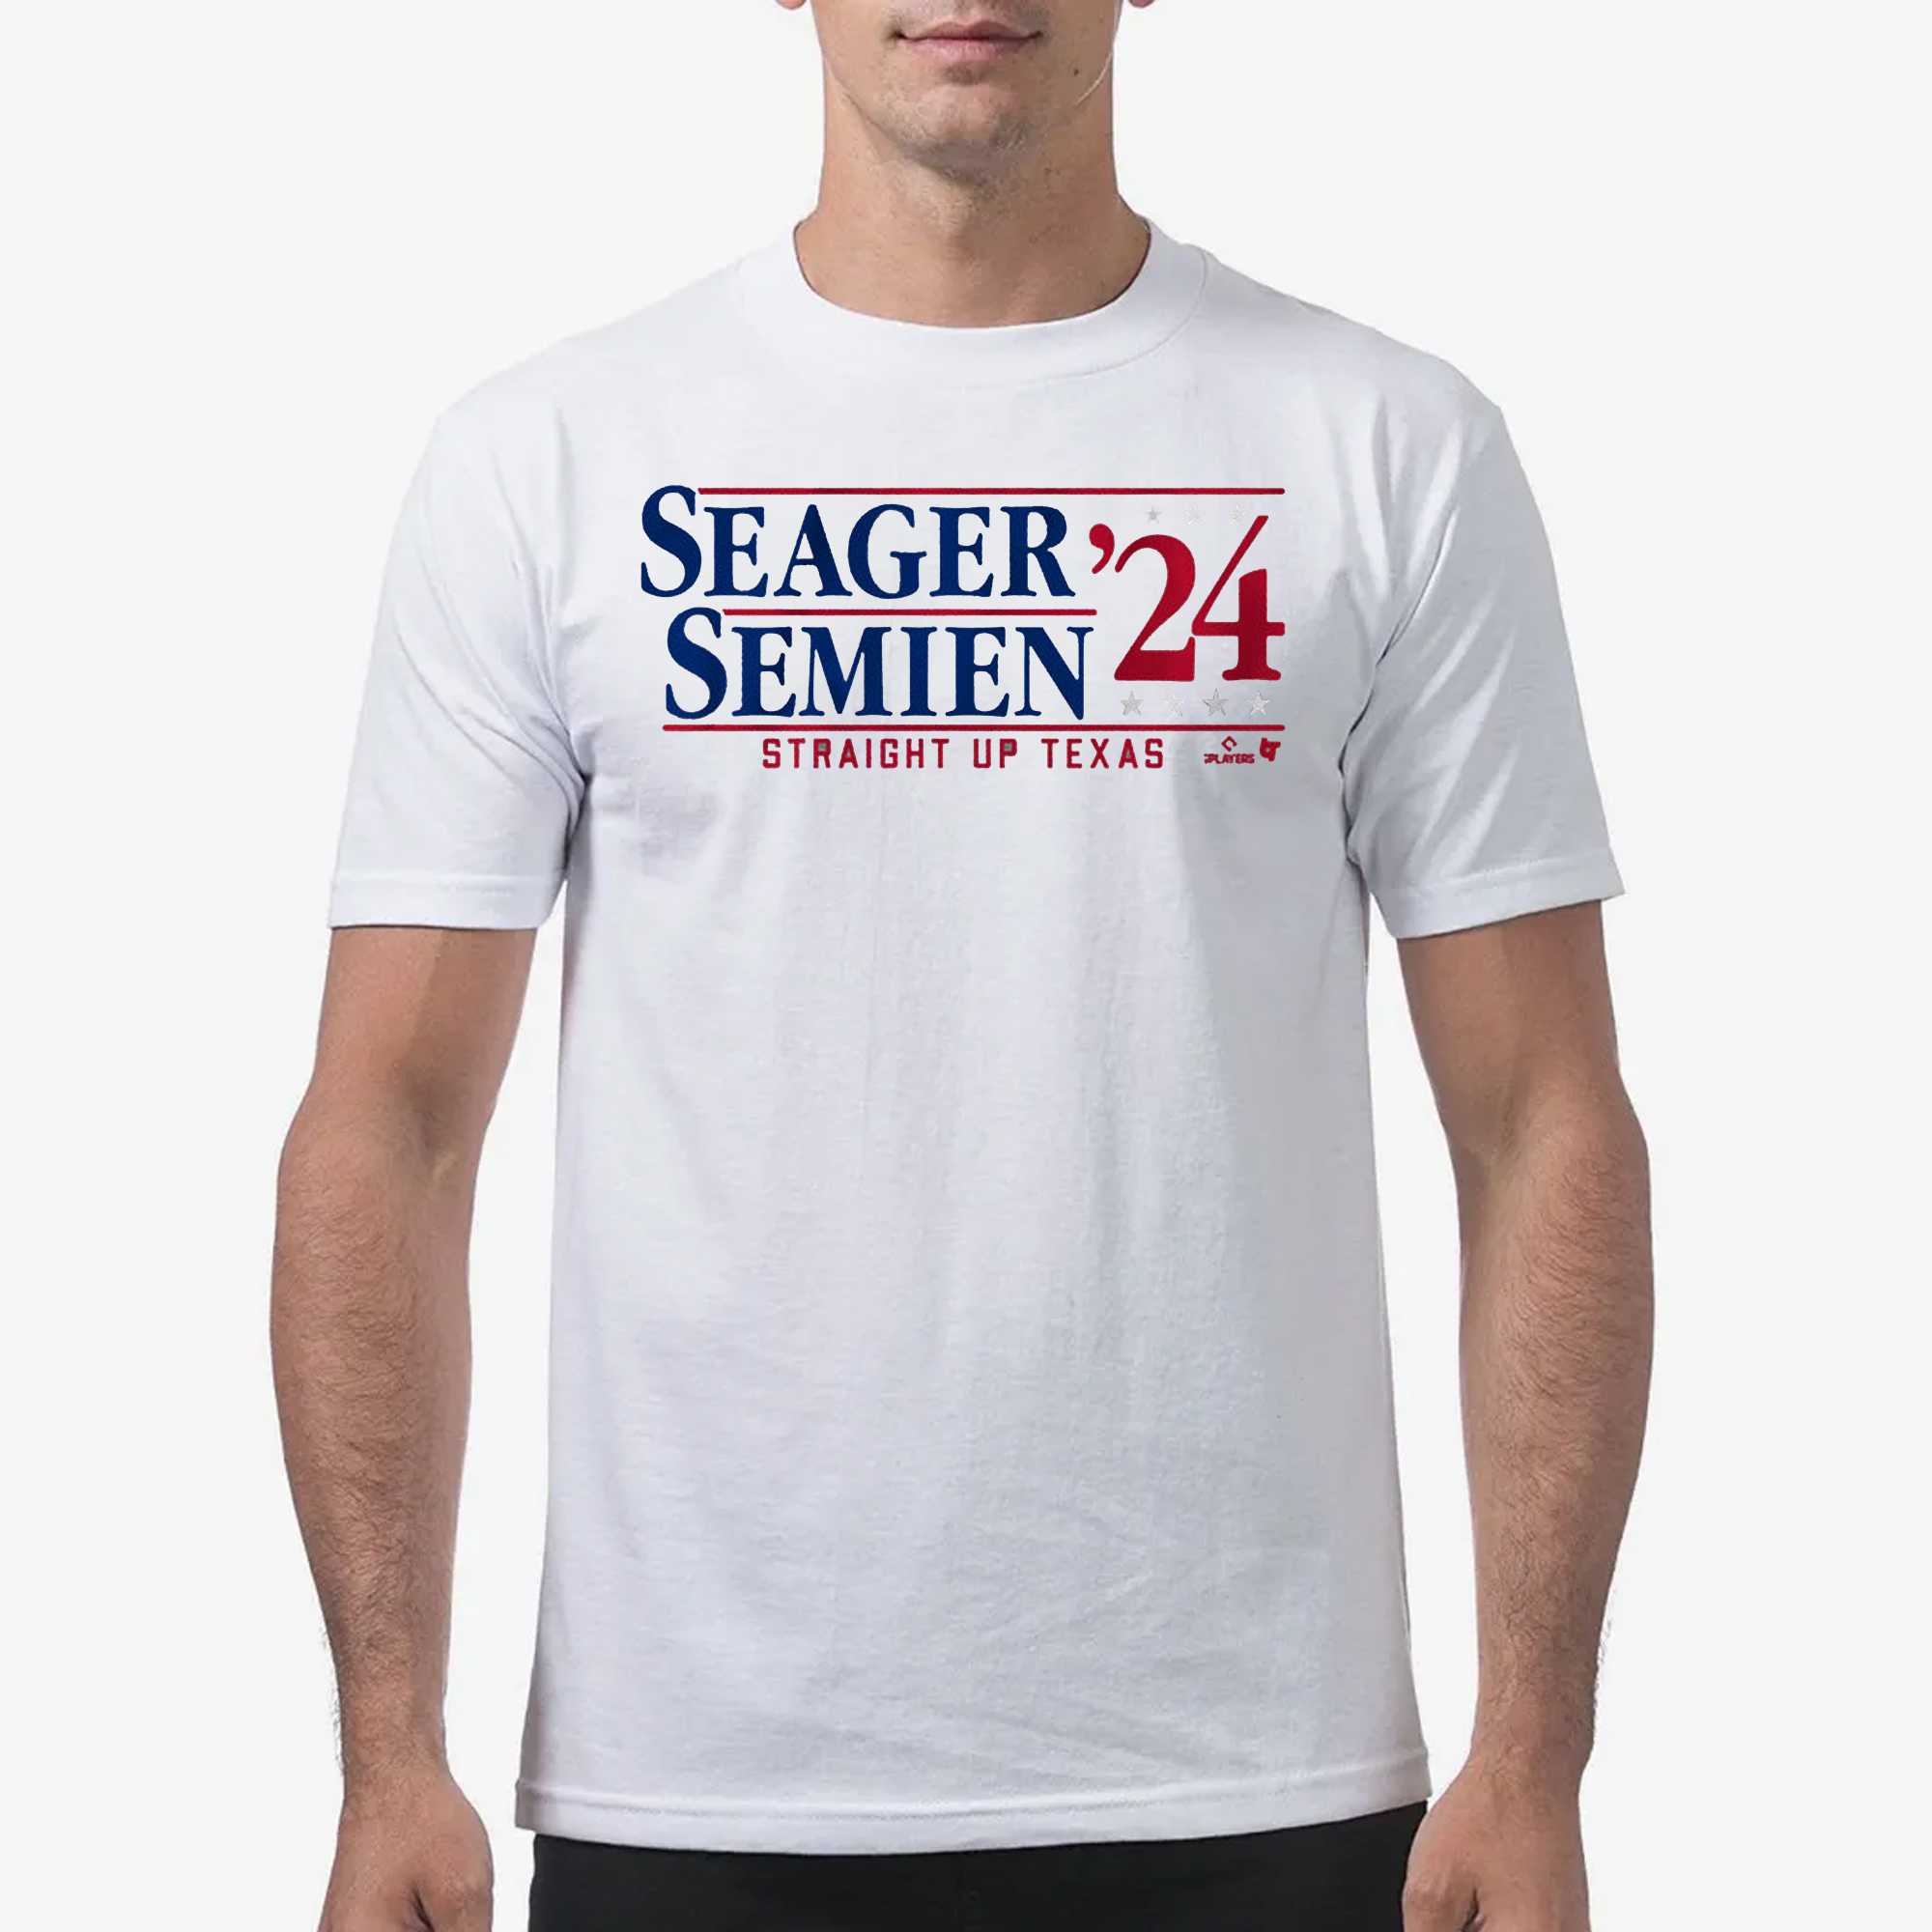 Seager Semien '24 Straight Up Texas T-shirt